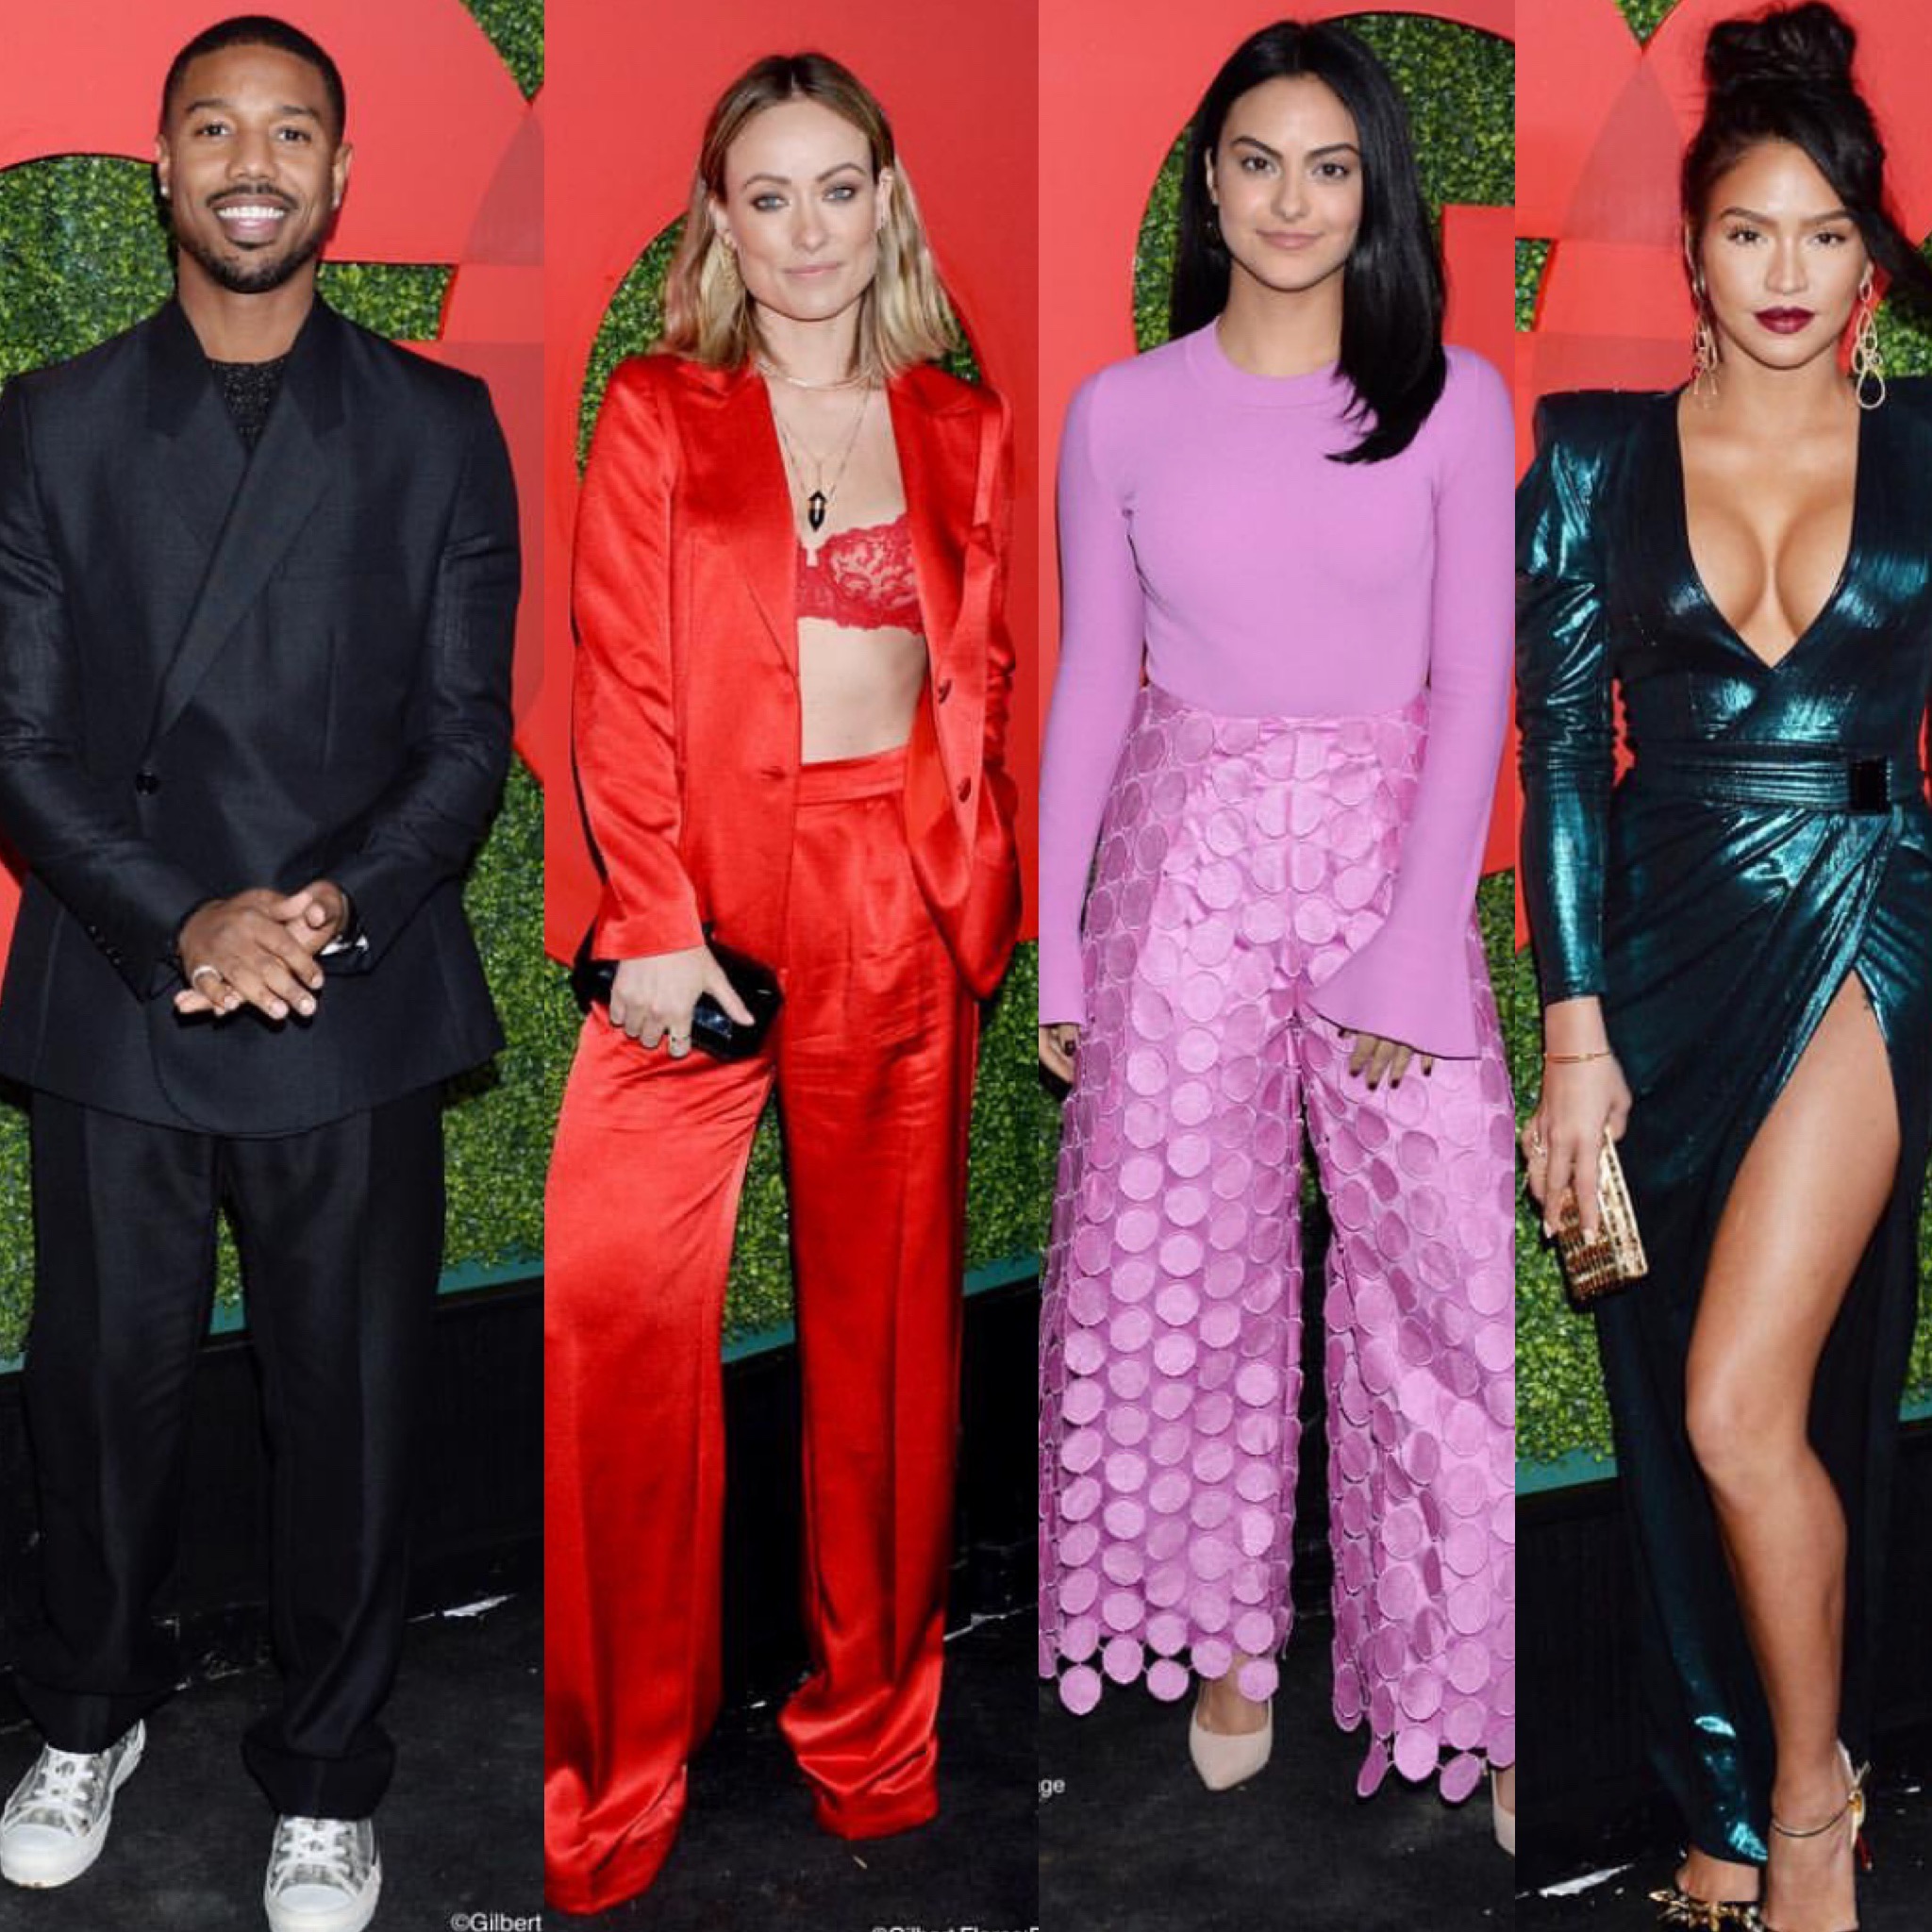 On-The-Scene-2018-GQ-Men-of-the-Year-Party-Featuring-Michael-B-Jordan-in-Dior-Olivia-Wilde-in-Selmacilek-and-Camila-Mendes-in-Solace-London-and-More-26